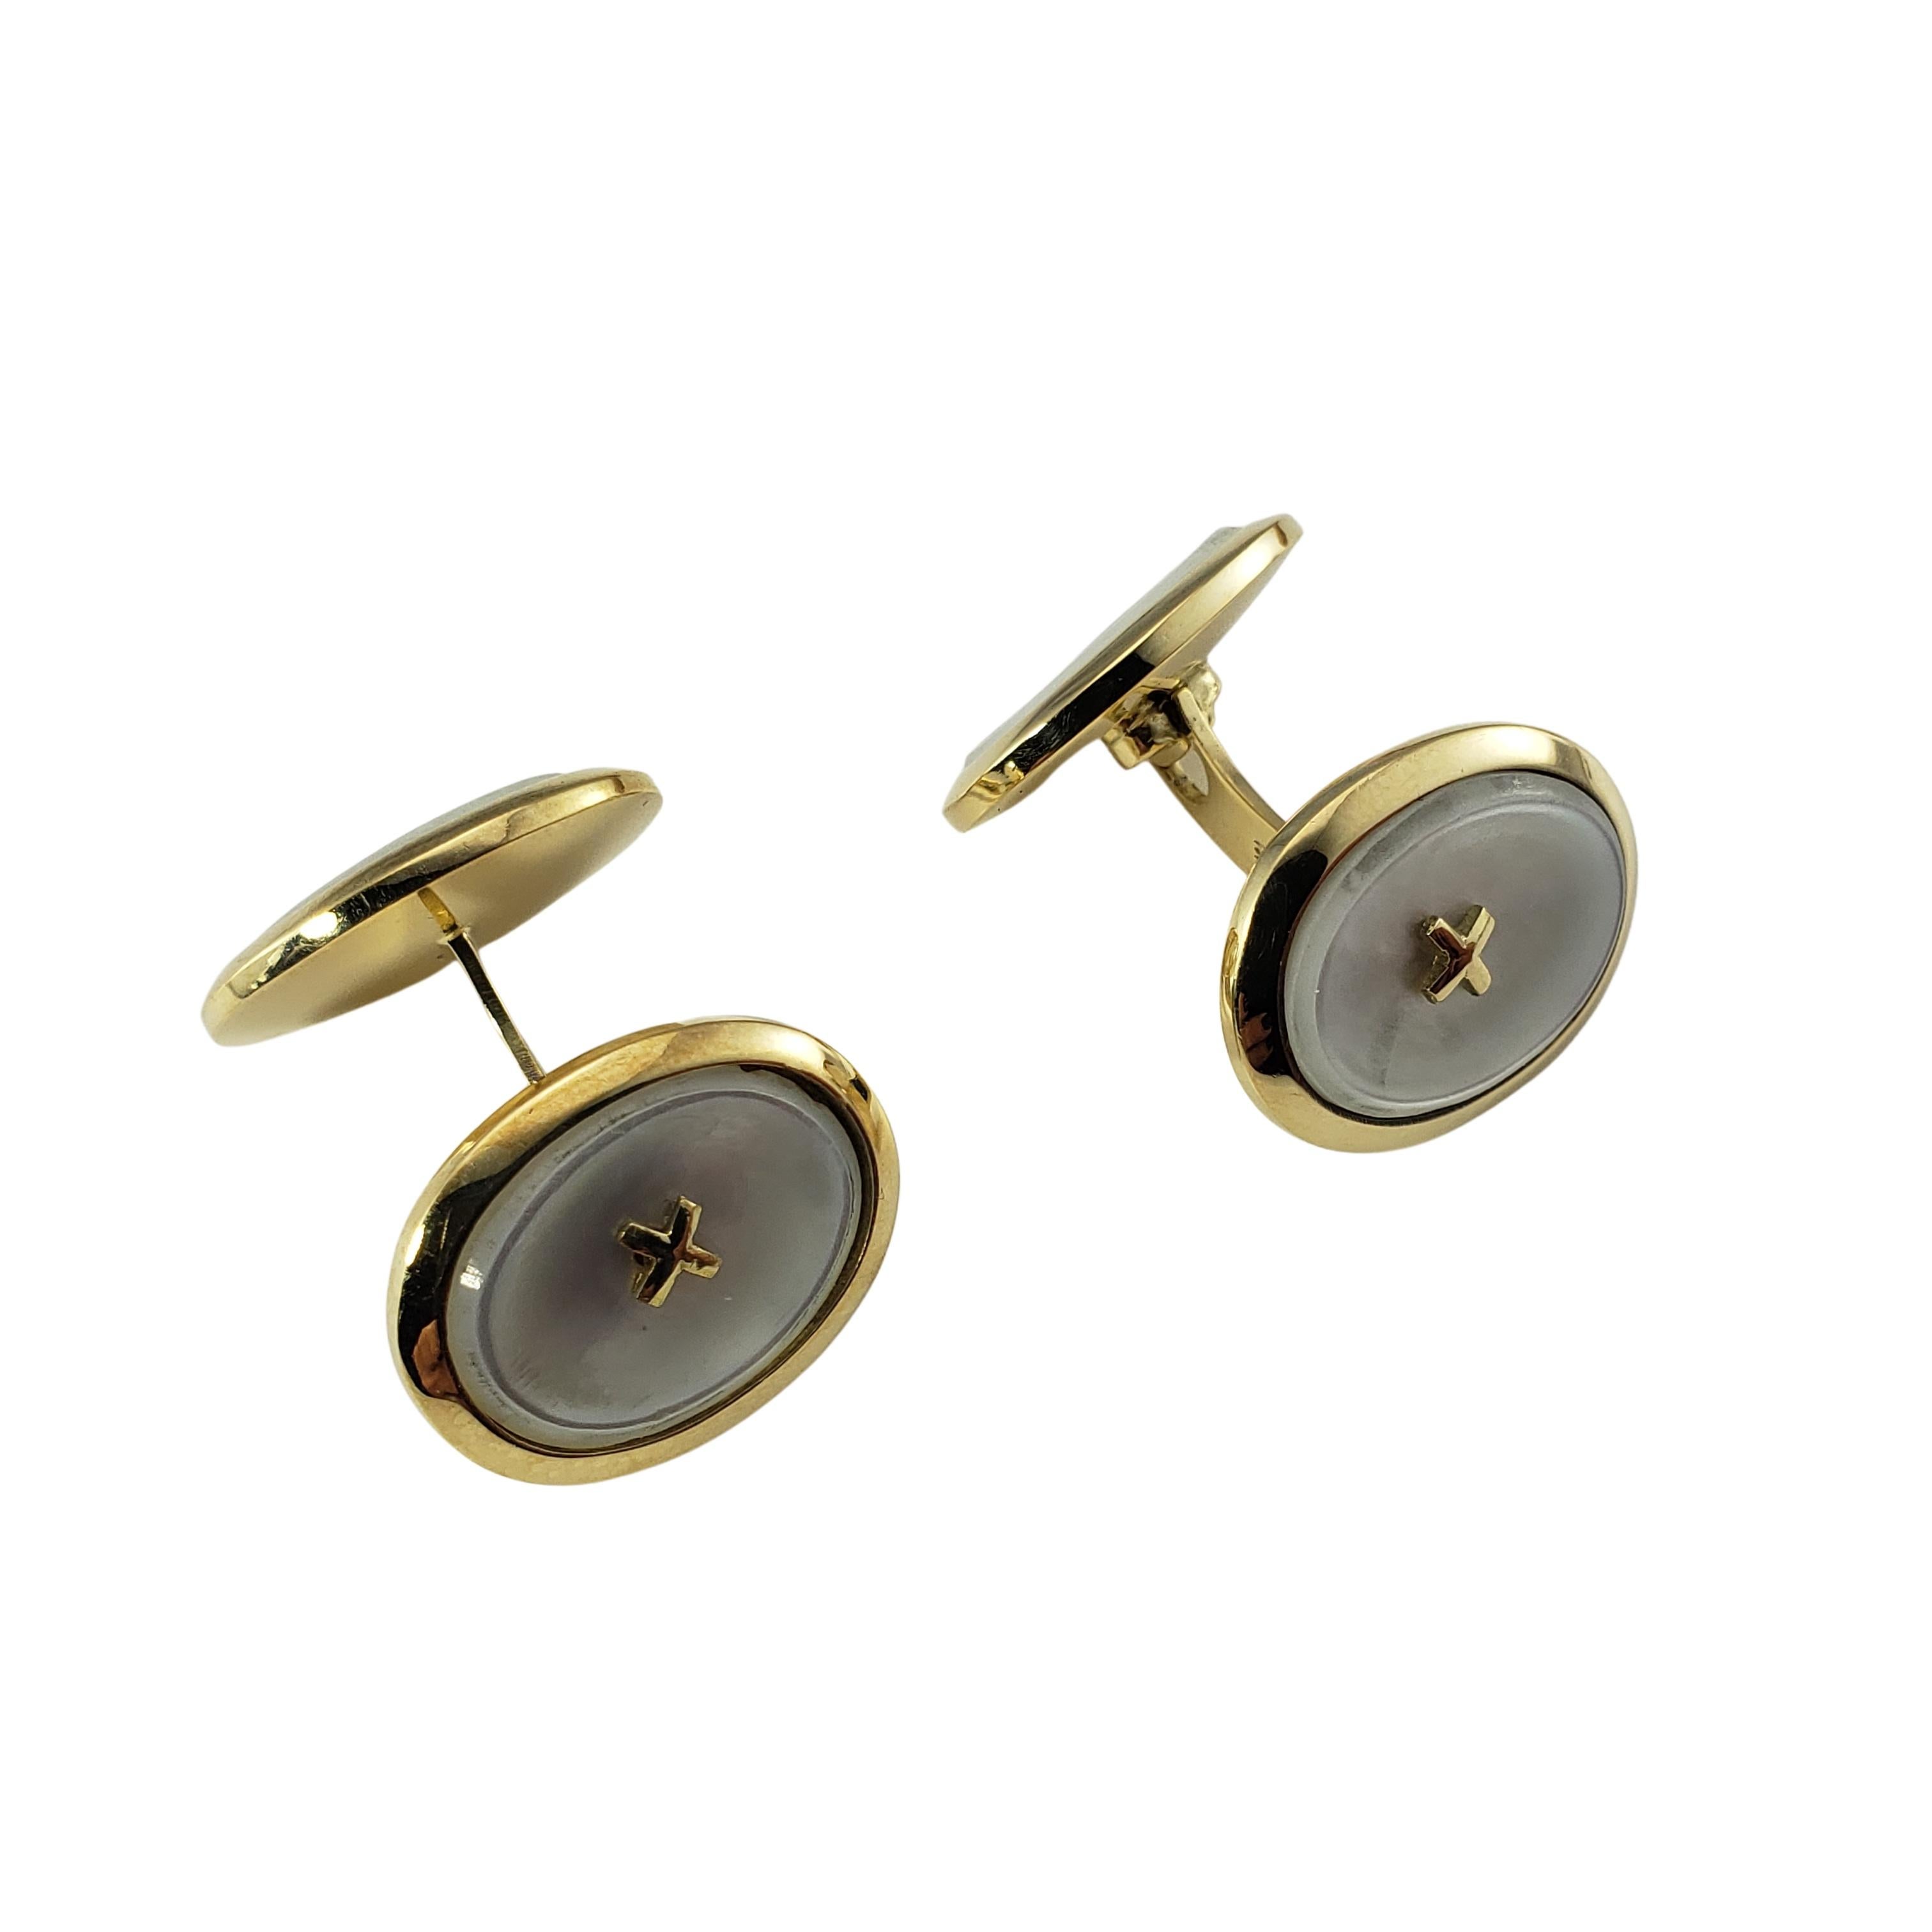 Vintage 14 Karat Yellow Gold and Mother of Pearl Cufflinks-

These elegant cufflinks are crafted in beautifully detailed 14K yellow gold and mother of pearl.

Matching buttons:  RL-00010248

Size: 18 mm x 15 mm

Weight:  8.8 dwt. /  13.8